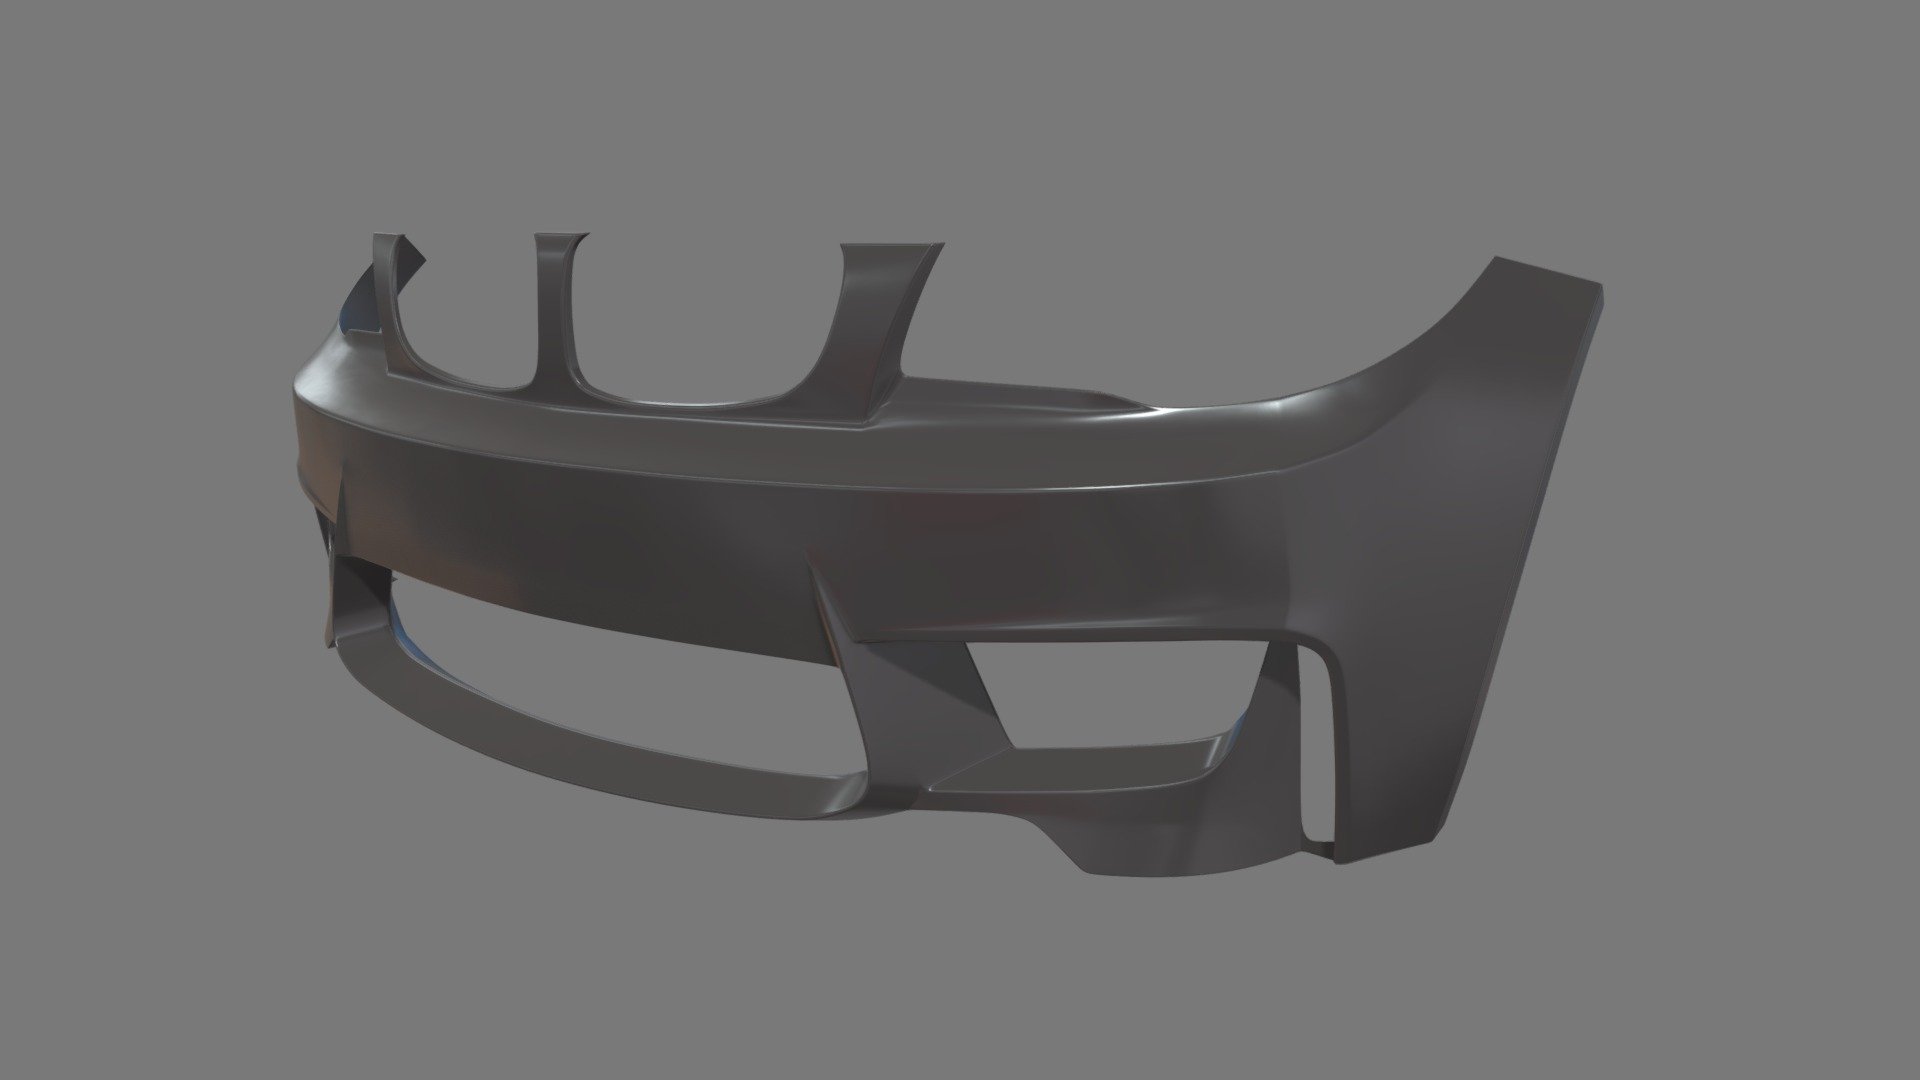 This model contains a Front Bumper Car based on a real stylized german car bumper which i modeled in Maya 2018. This model is perfect to create a new great scene with different car pieces or part of a car model. I got a lot of different Car Seats, Car Spoiler and Car Parts on my profile.

The model is ready as one unique part and ready for being a great CGI model and also a 3D printable model, i will add the STL model, tested for 3D printing in Ultimaker Cura. I uploaded the model in .mb, ,blend, .stl, .obj and .fbx. If you need any other file tell me.

If you need any kind of help contact me, i will help you with everything i can. If you like the model please give me some feedback, I would appreciate it.

Don’t doubt on contacting me, i would be very happy to help. If you experience any kind of difficulties, be sure to contact me and i will help you. Sincerely Yours, ViperJr3D - Front Bumper Car - Buy Royalty Free 3D model by ViperJr3D 3d model